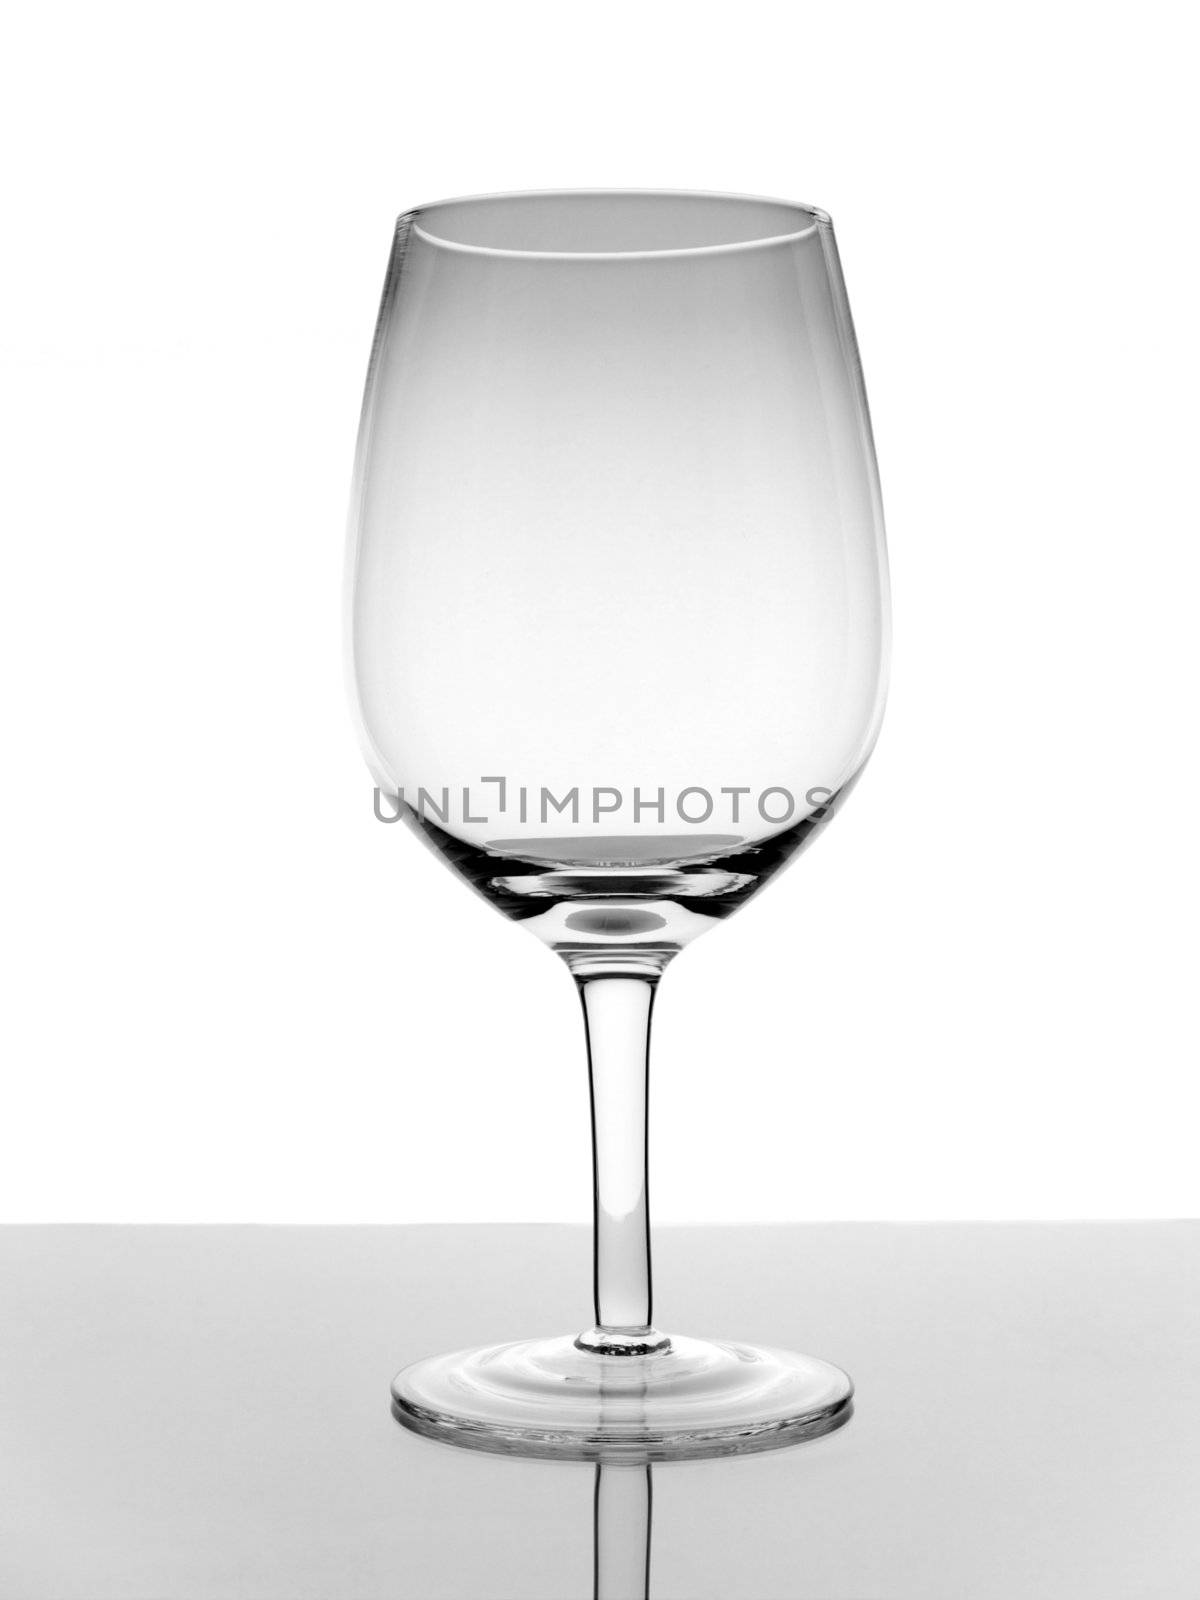 A shot of an empty glass wine with reflection on white background.